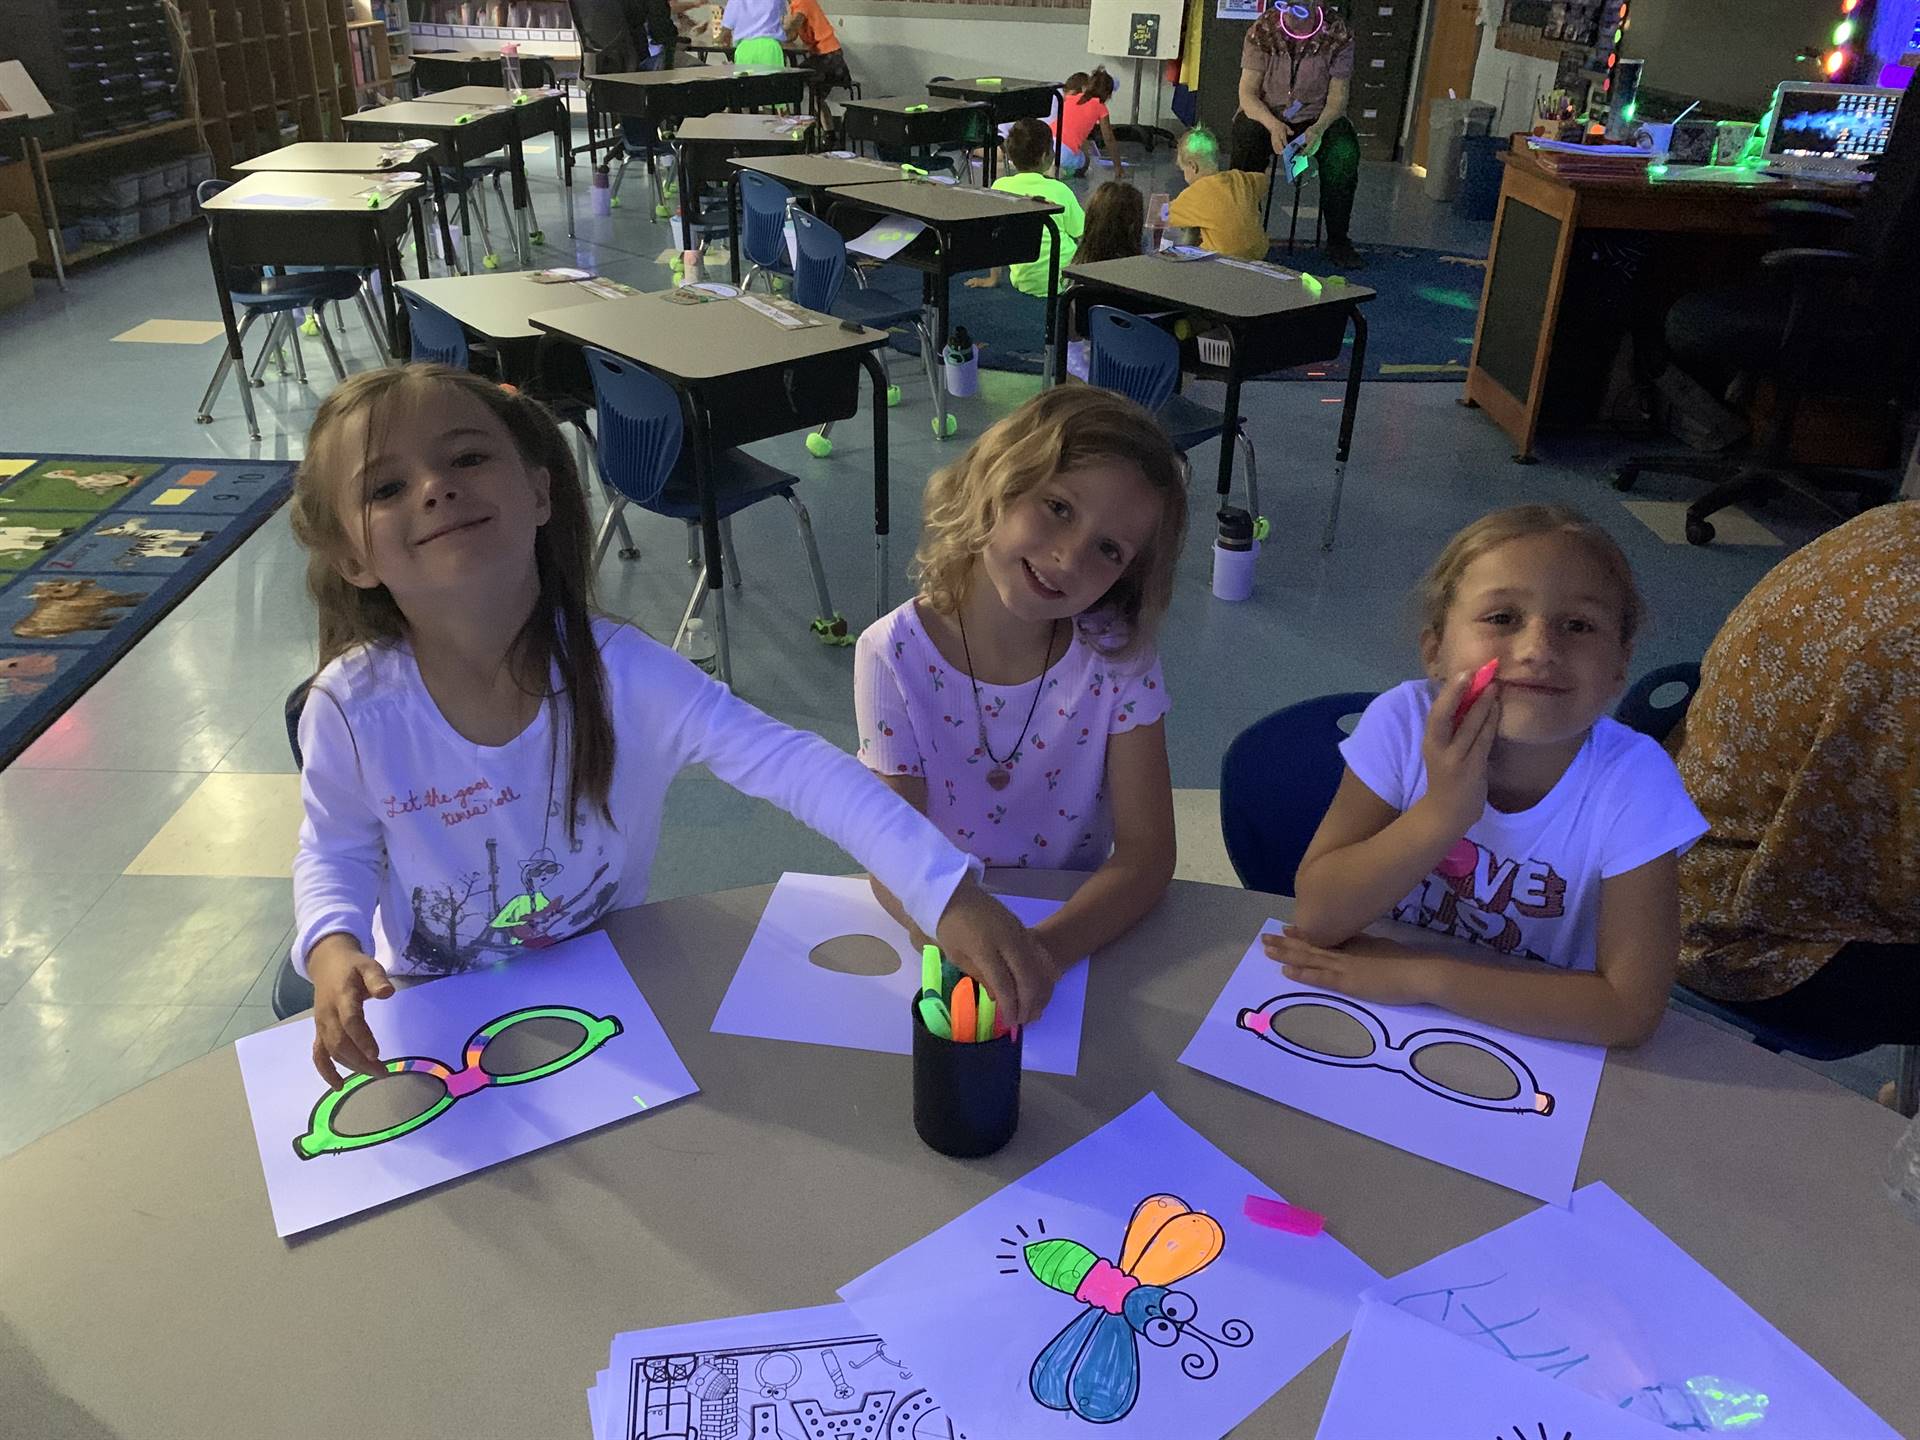 3 students color glow day pictures with markers